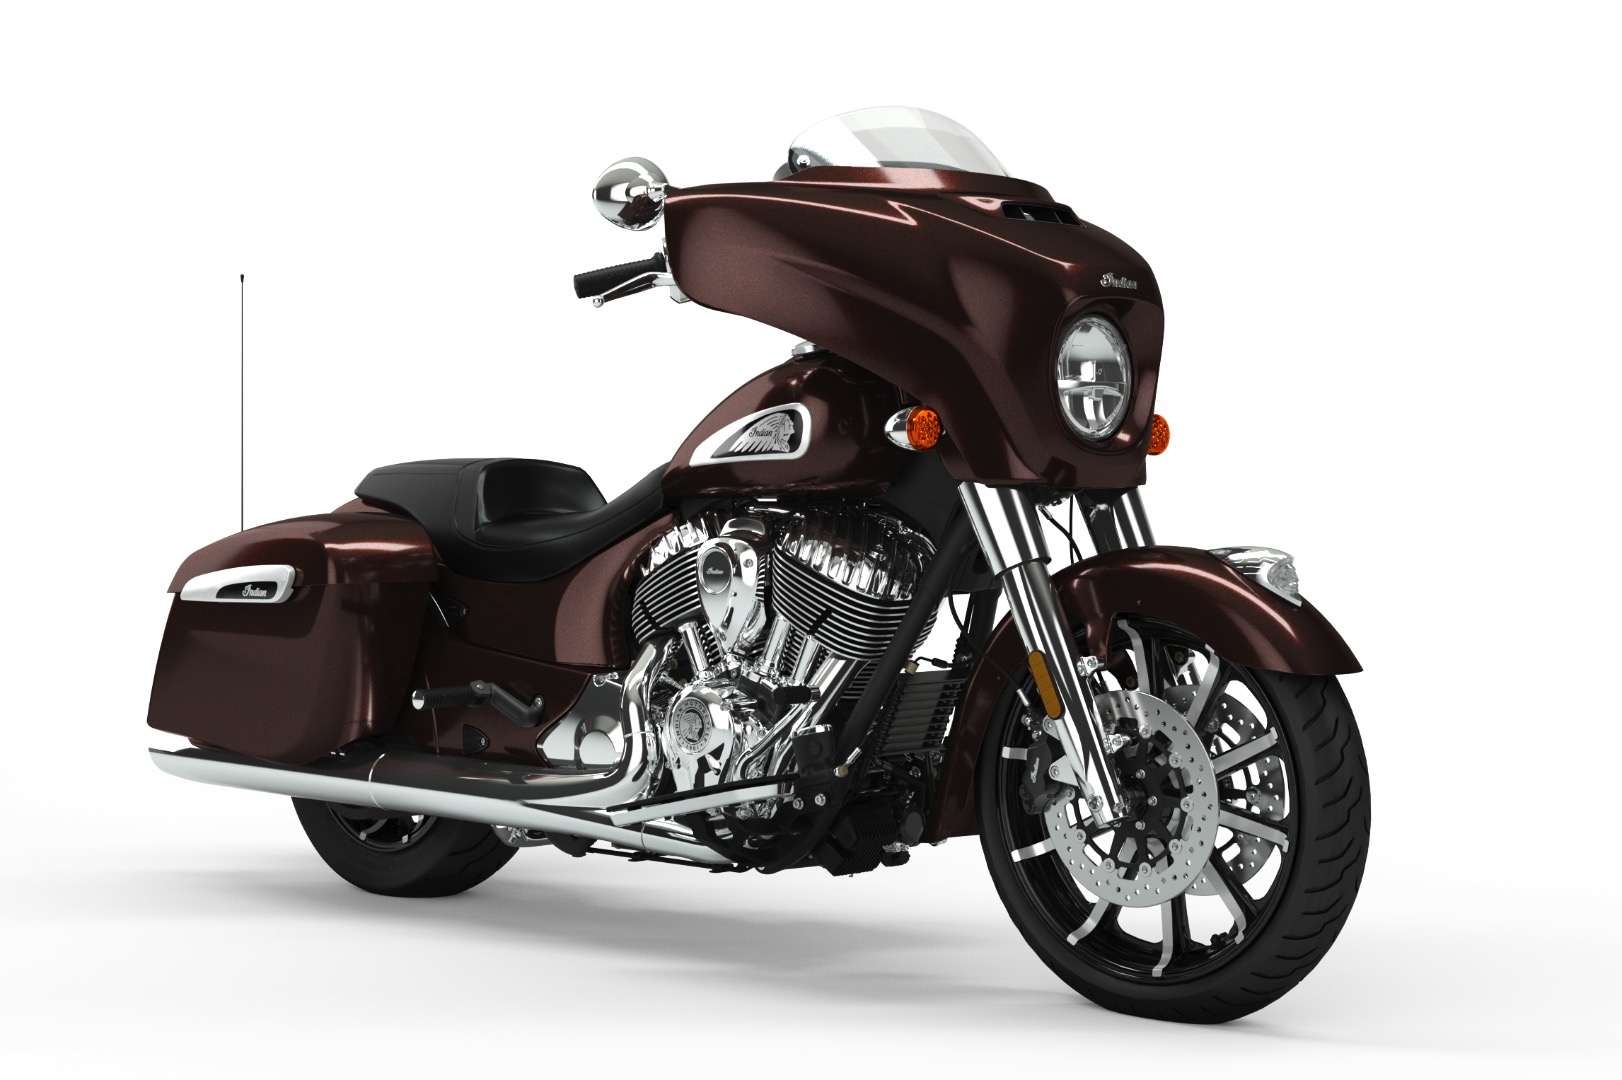 Review of Indian Chieftain Limited 2019 pictures, live photos